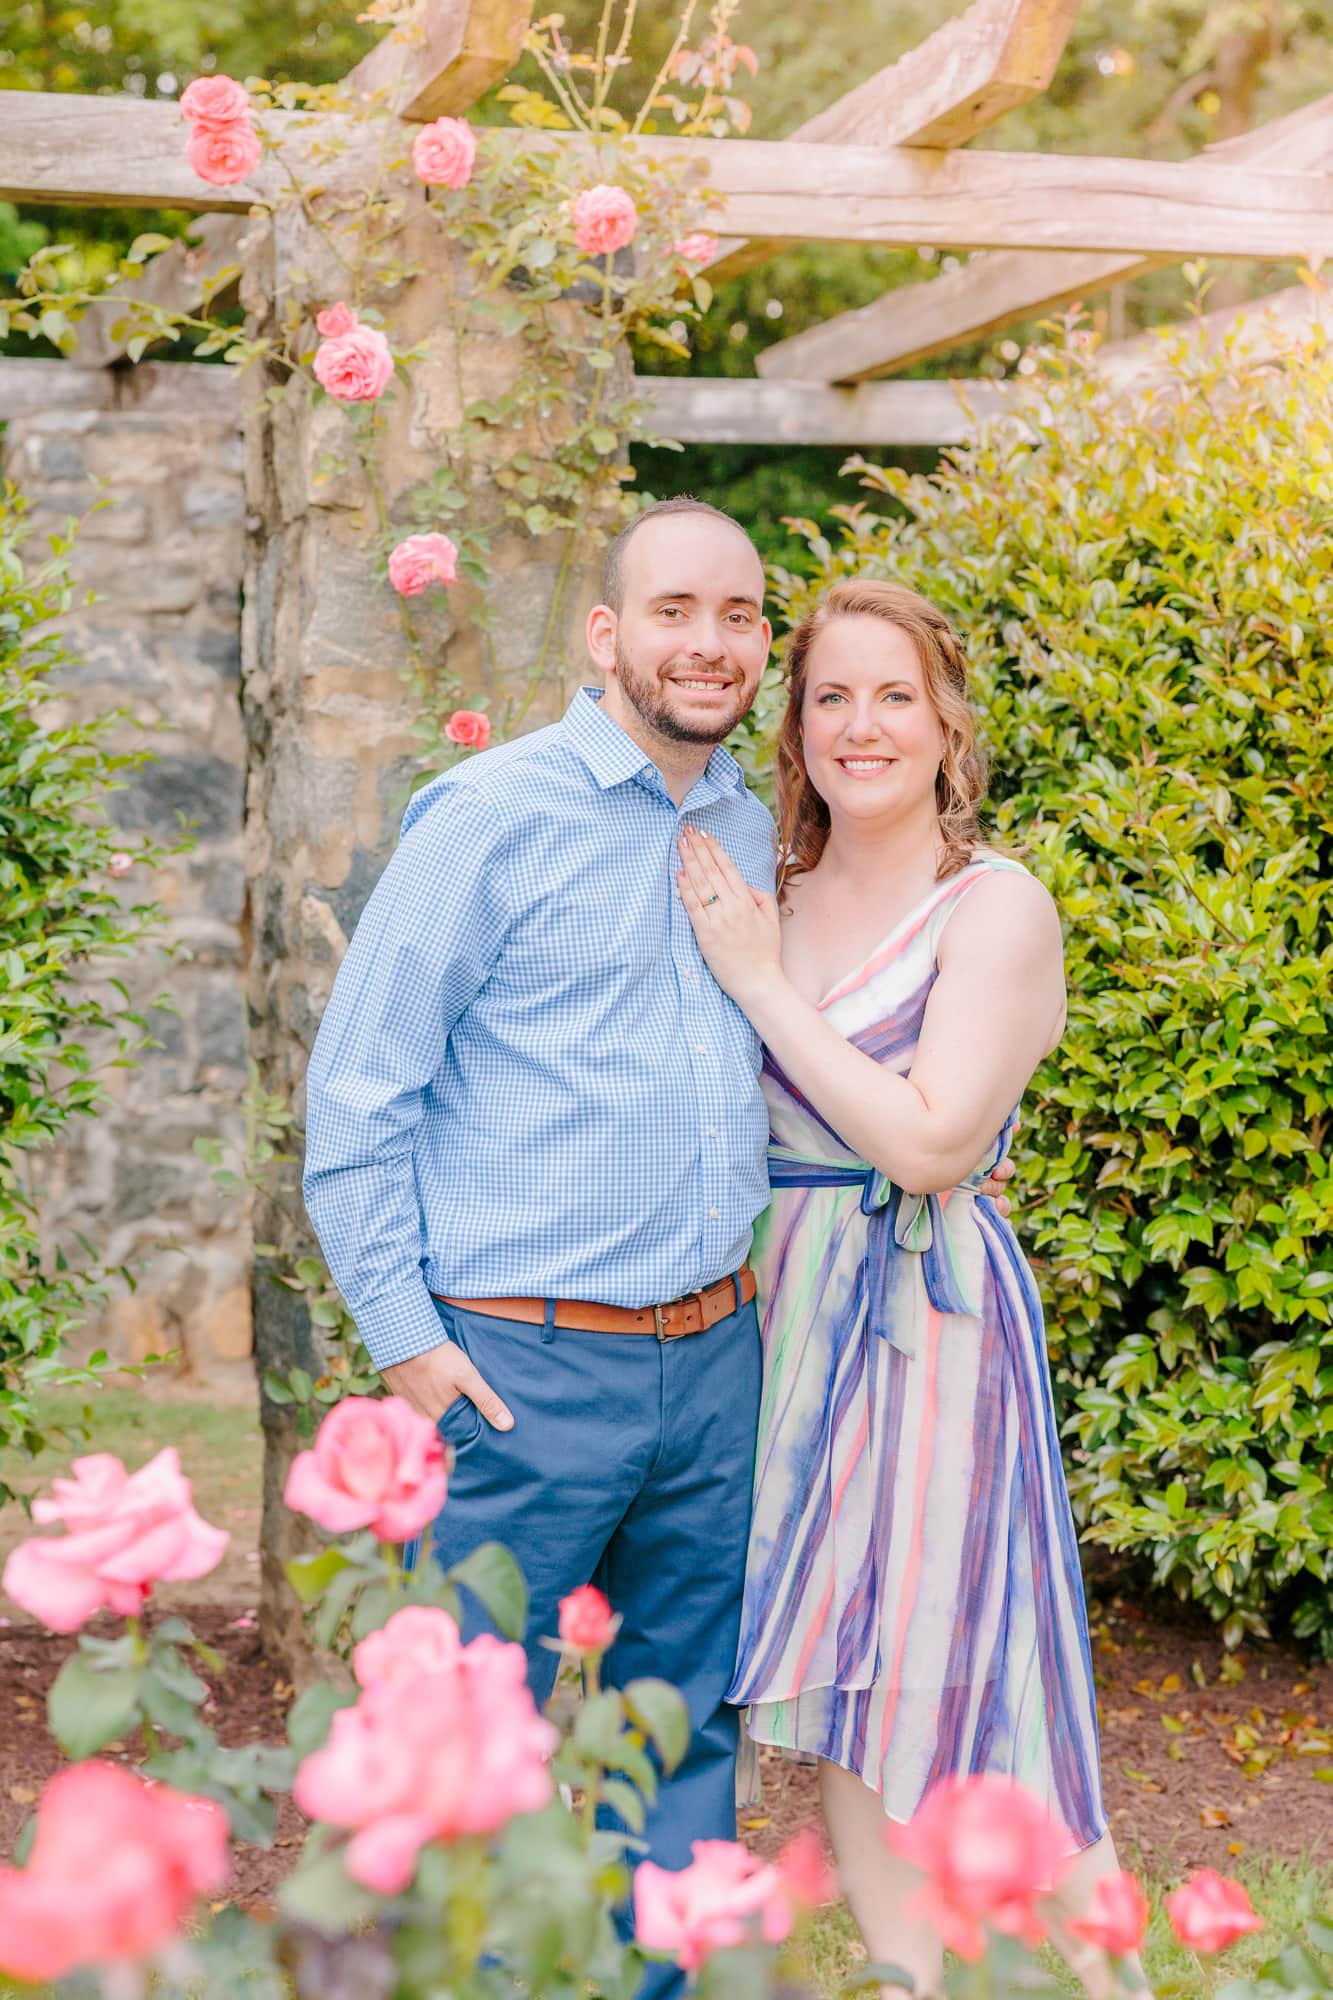 The couple smiles for the camera, posing in front of a stone pillar at the Raleigh, NC rose garden.